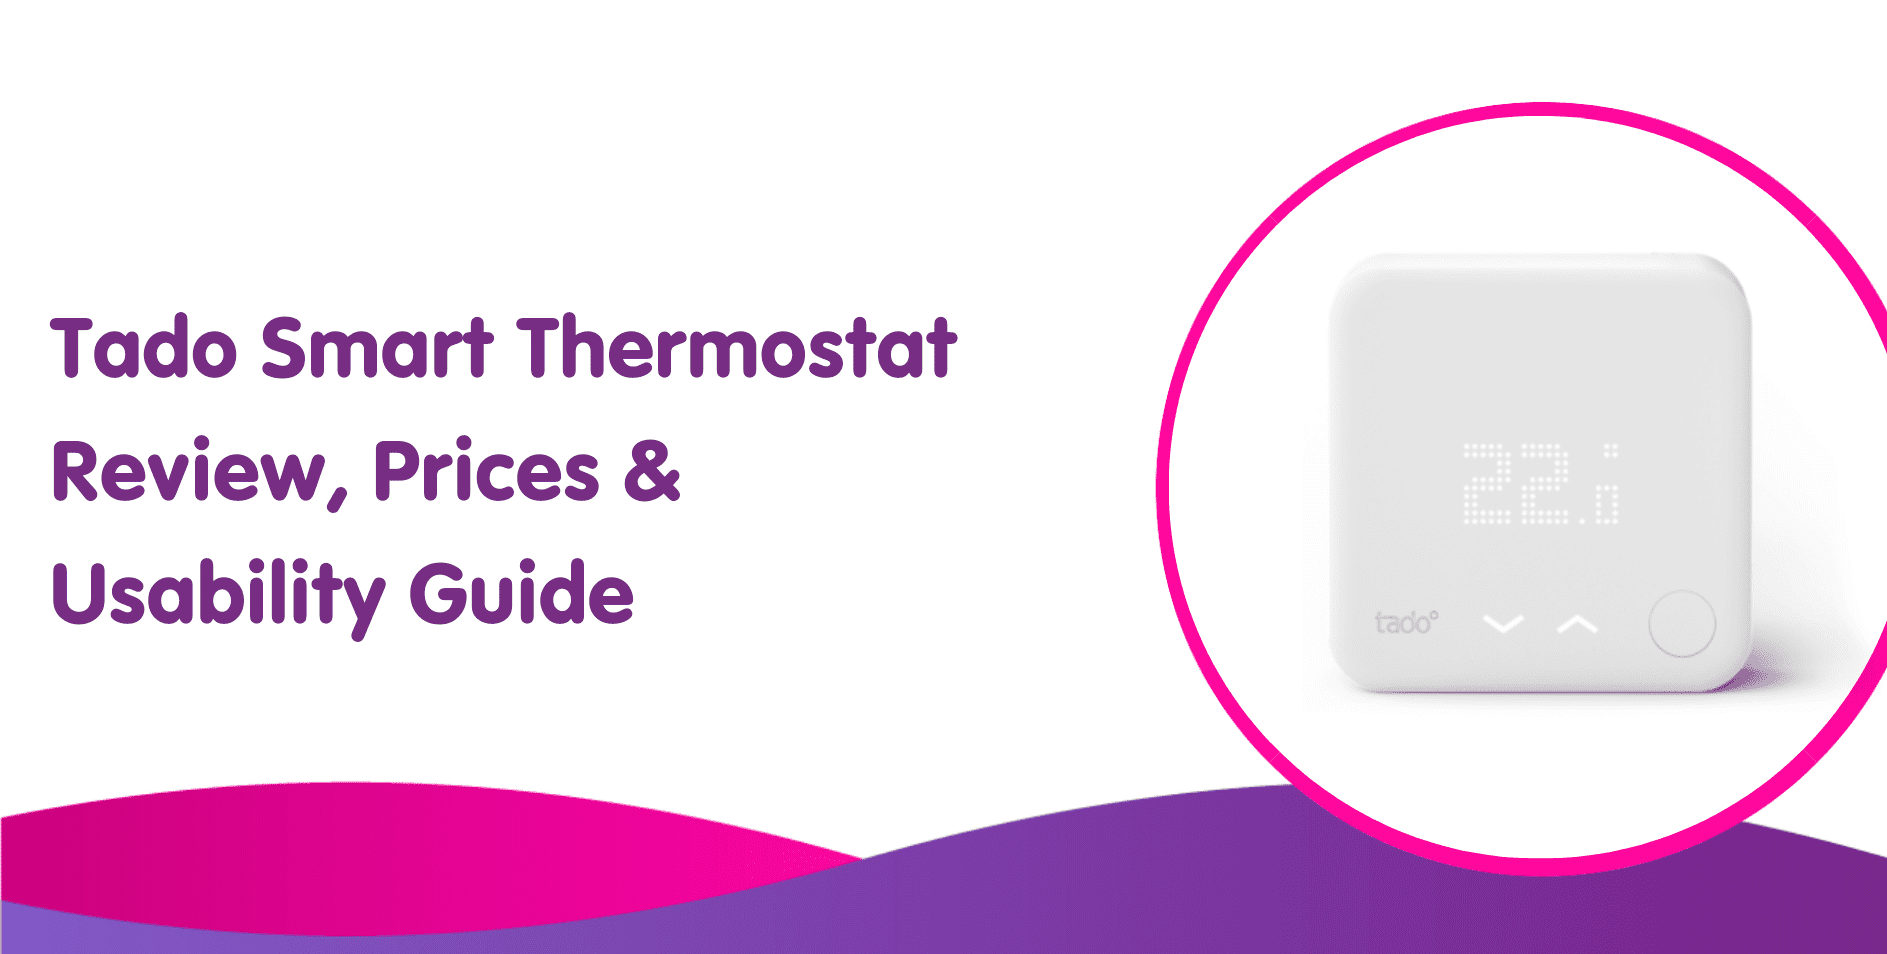 Tado Smart Thermostat Review, Prices & Usability Guide